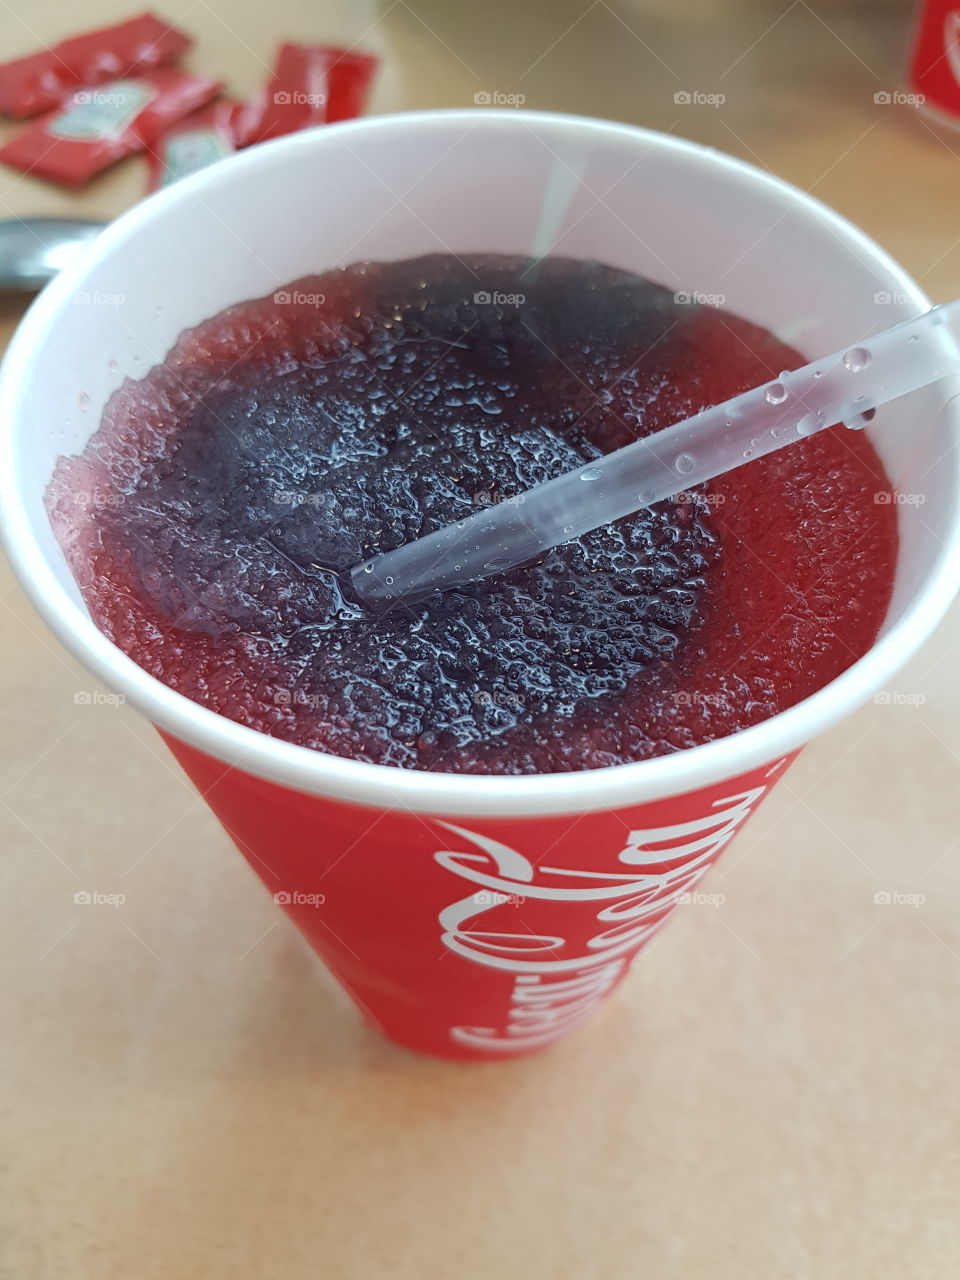 A mixture of the Blie flavoured Slushi and the Red Raspberry flavoured Slushi in a Coca Cola cup.